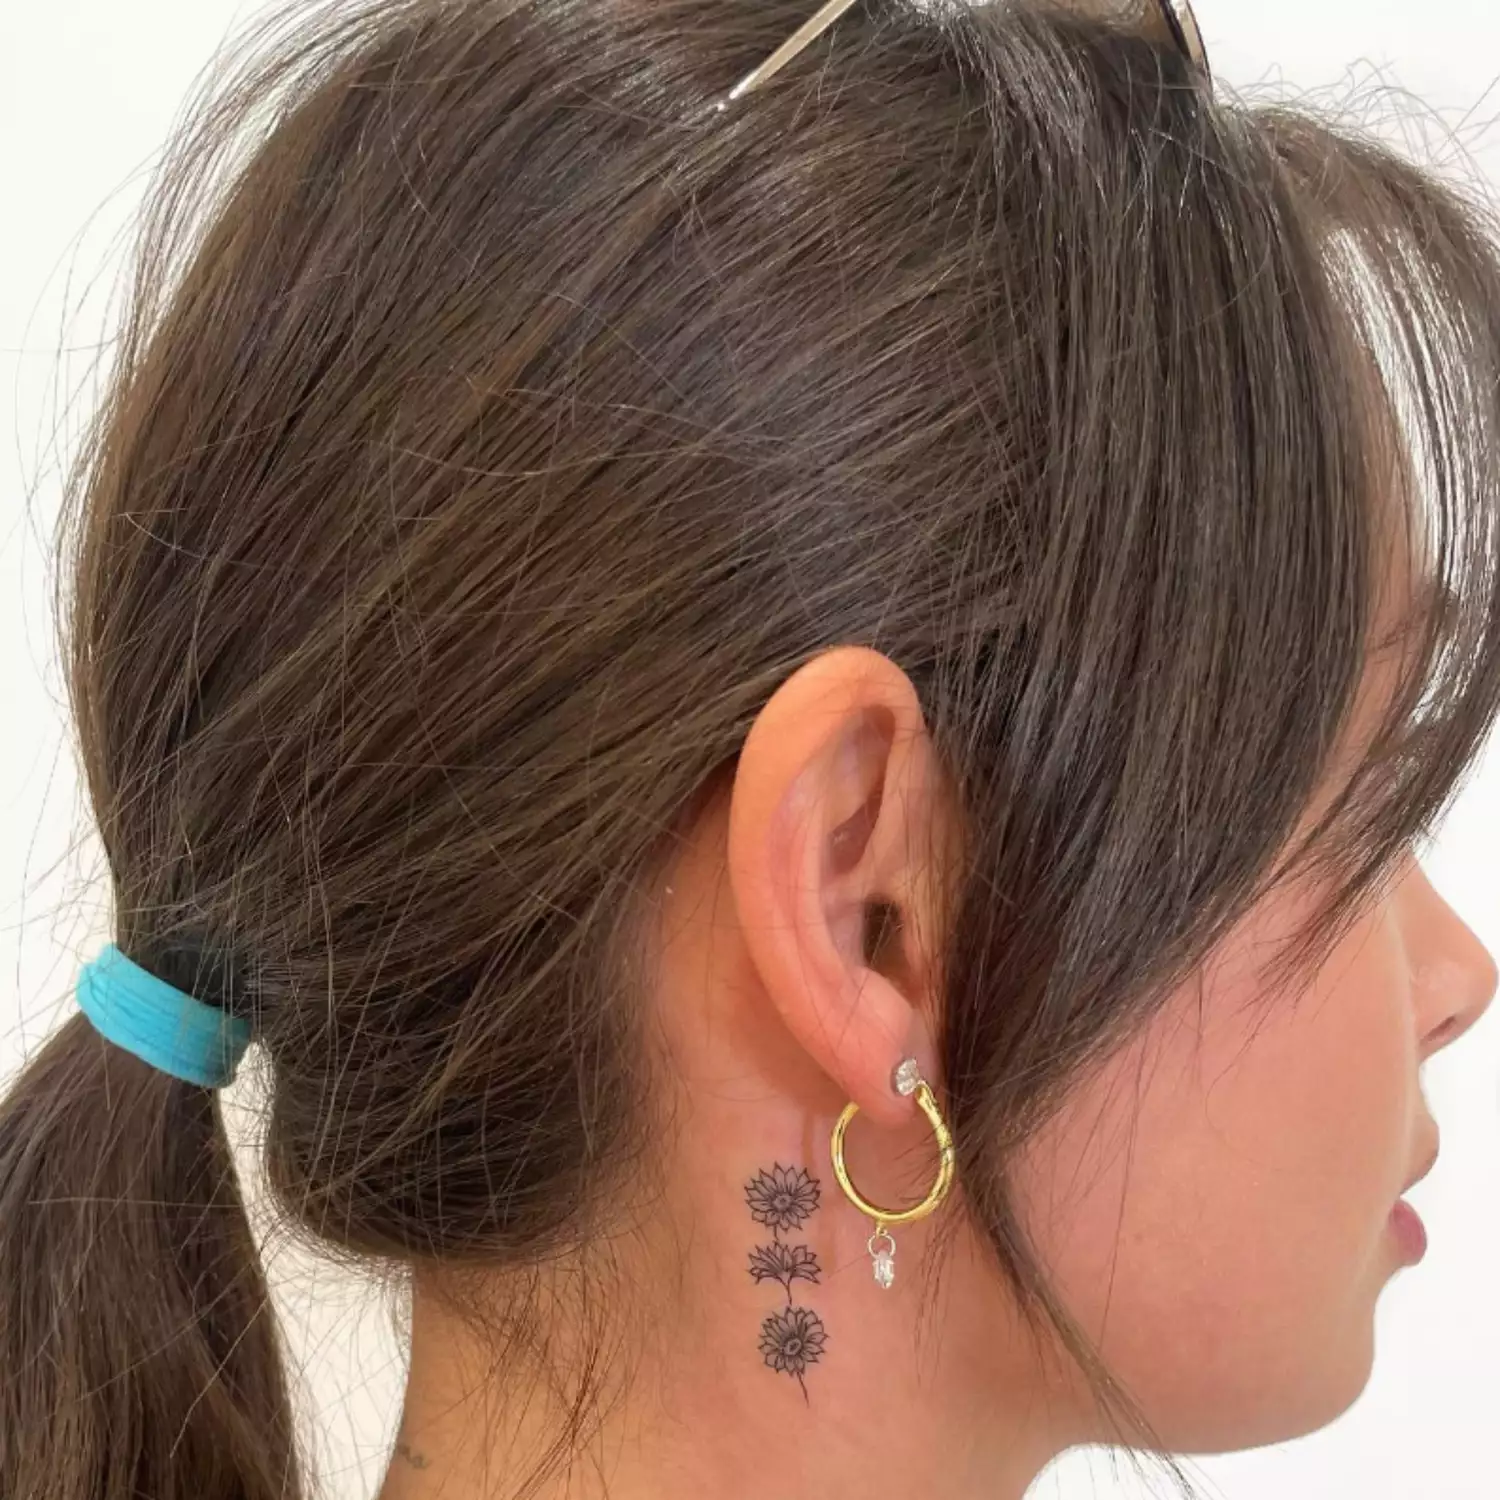 zoomed-in photo of person with flower tattoo behind the ear